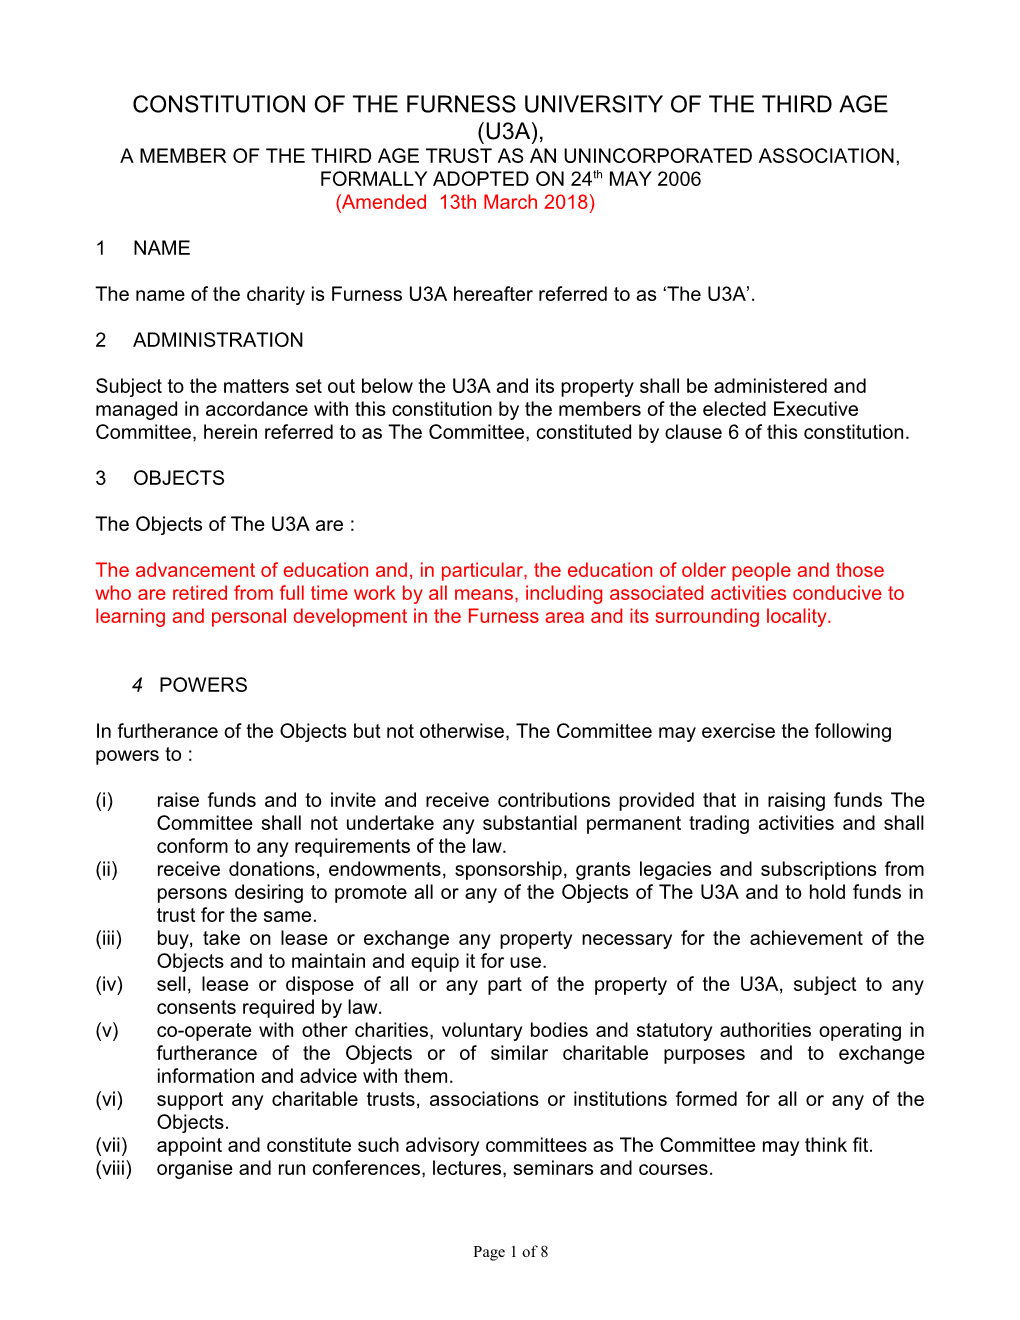 Constitution of the Furness University of the Third Age (U3a)